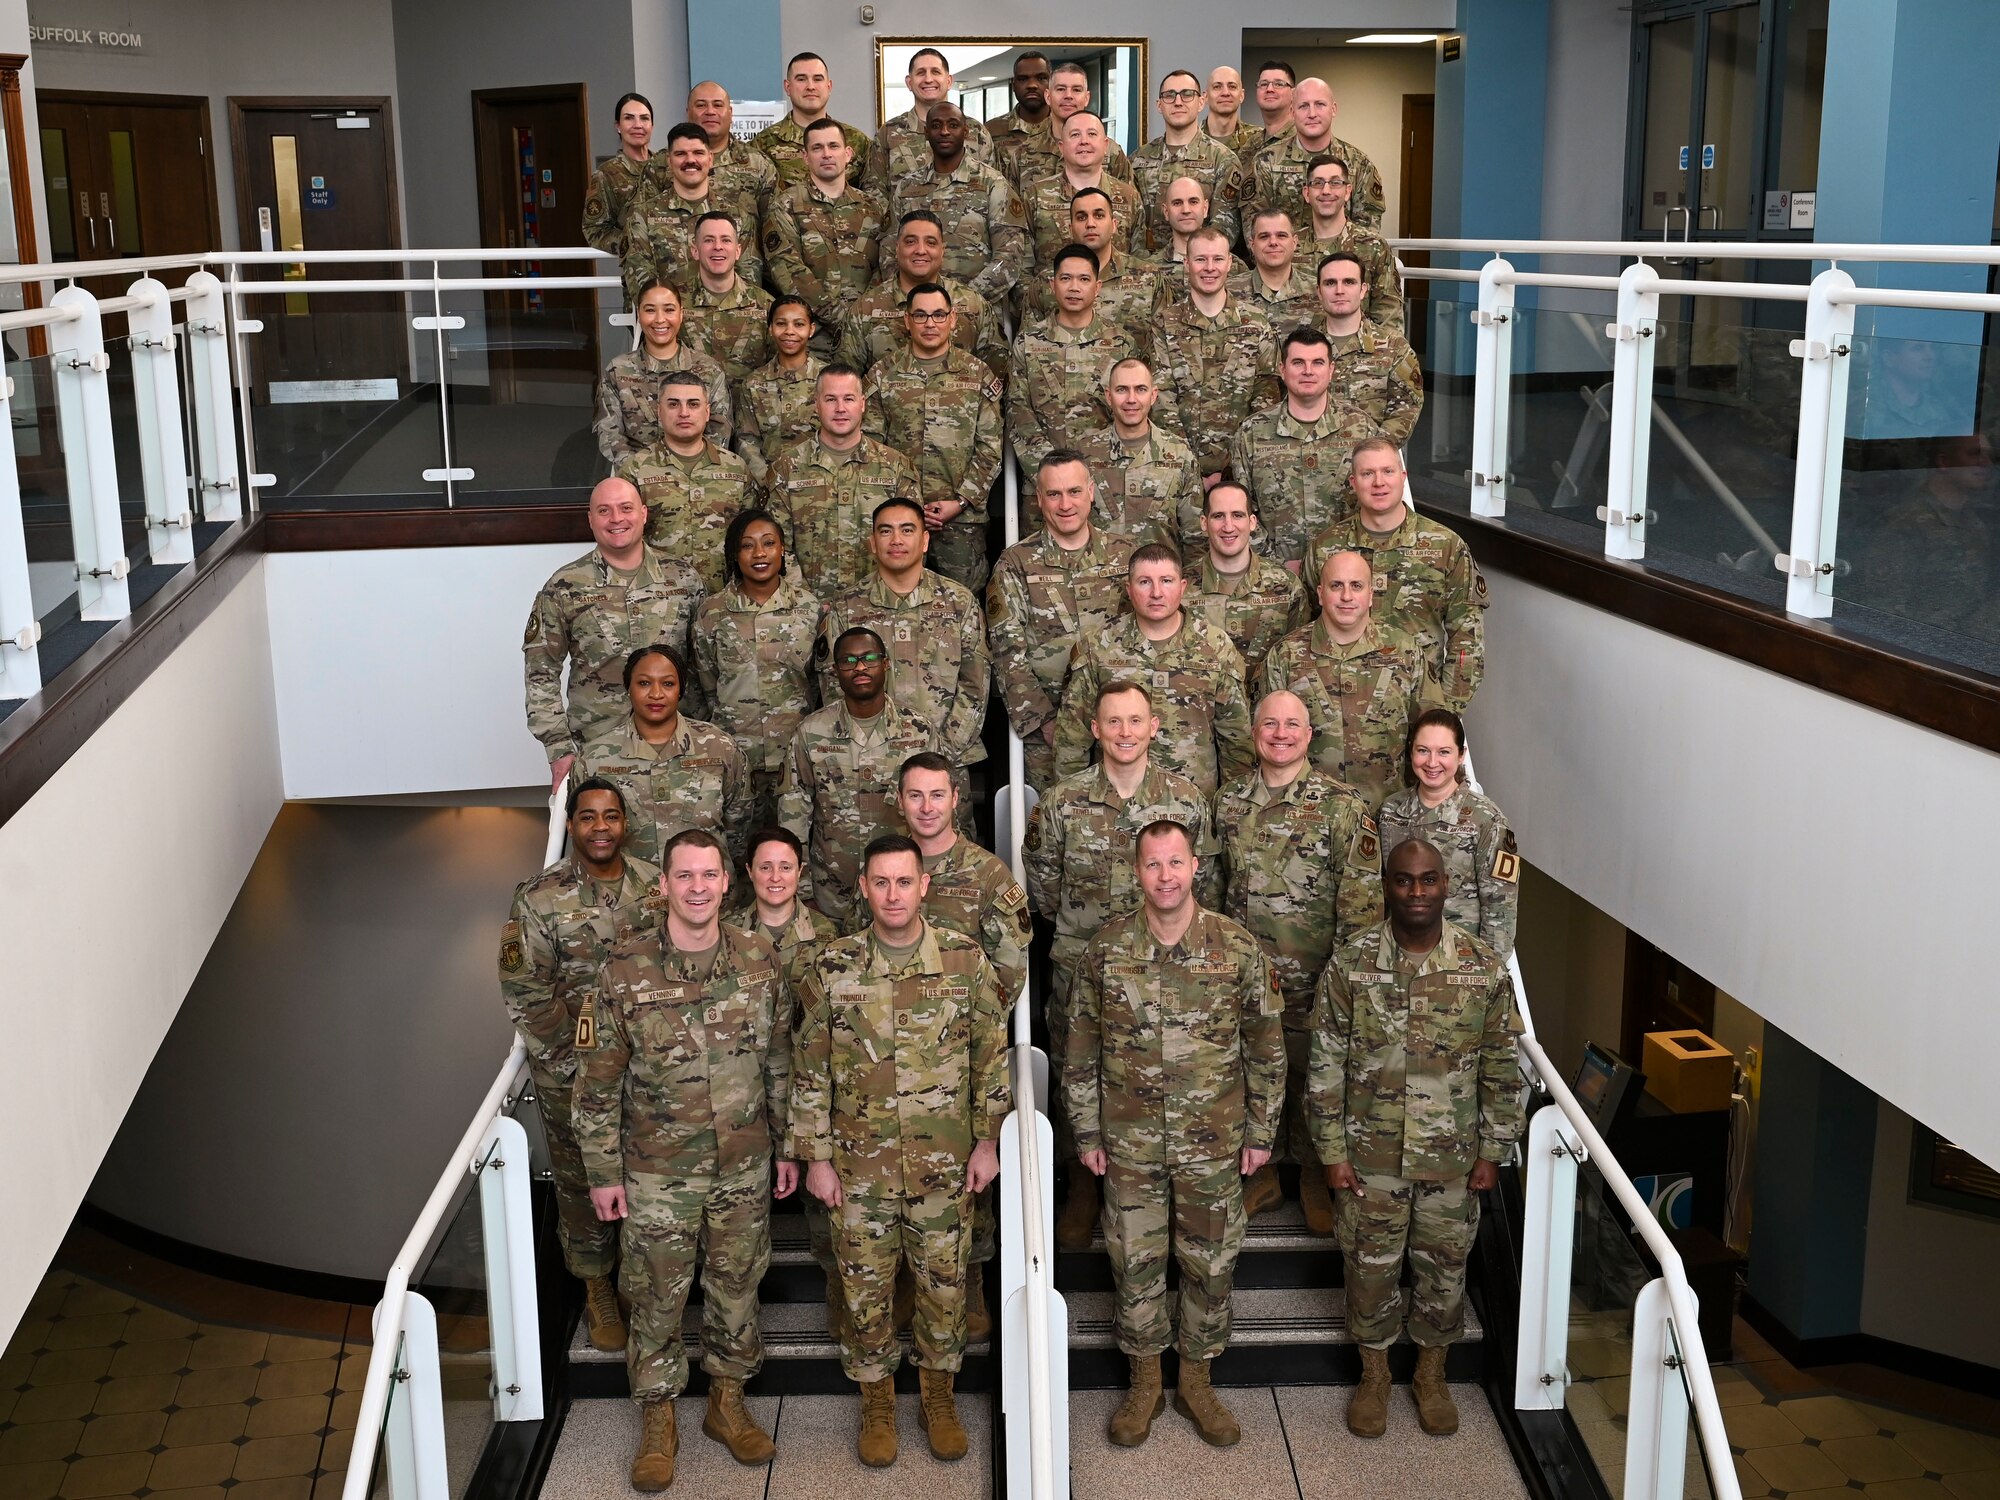 The Chief's Summit focuses on creating connections between enlisted leadership with the purpose to build and strengthen professional leadership within the Air Force.